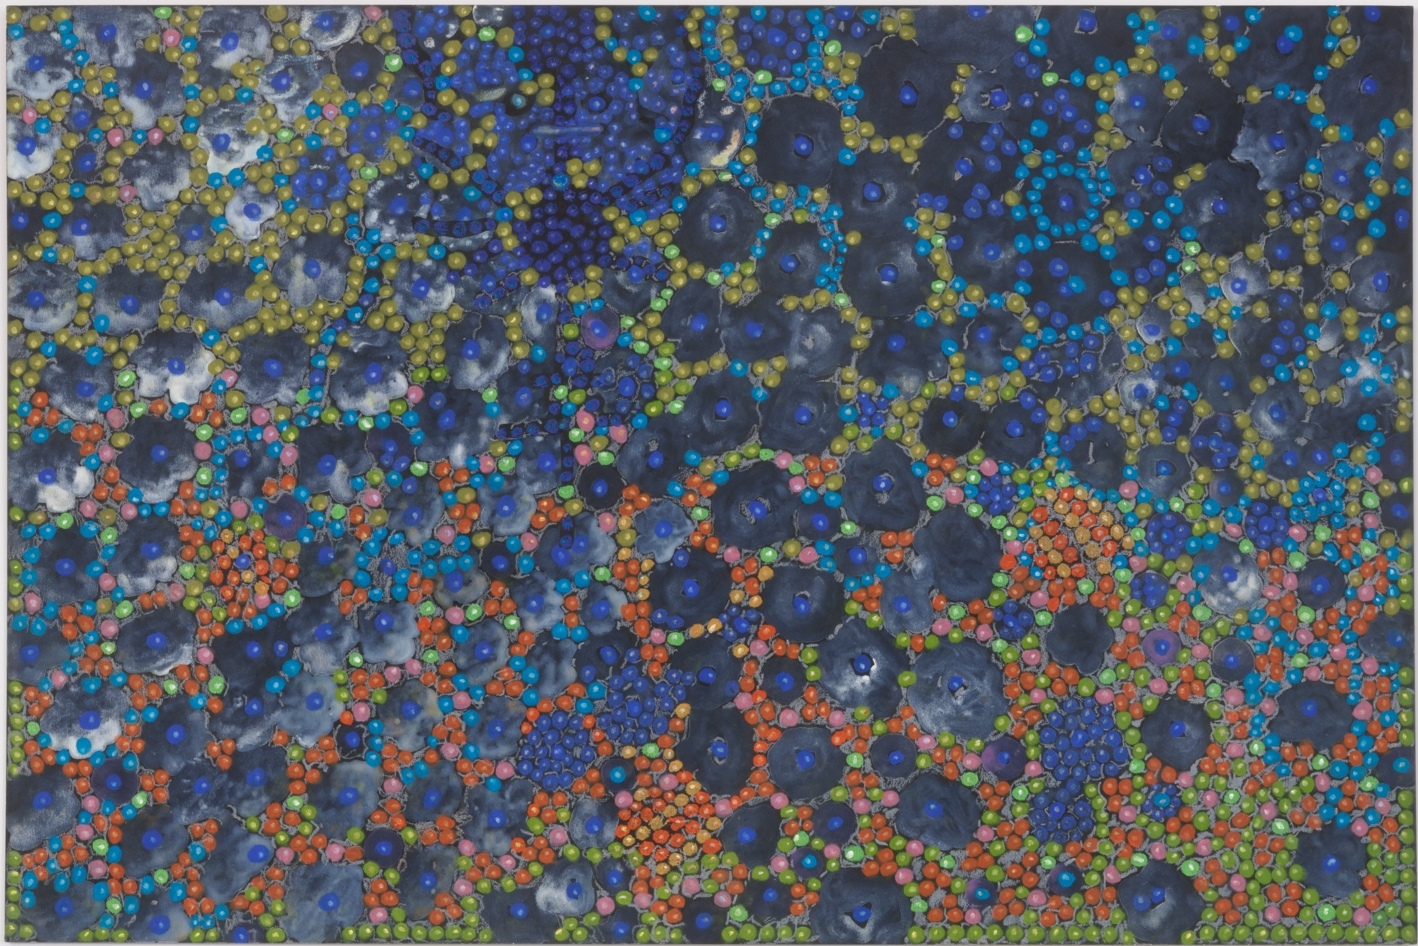 Untitled, c. 1969, Oil and pastel on board